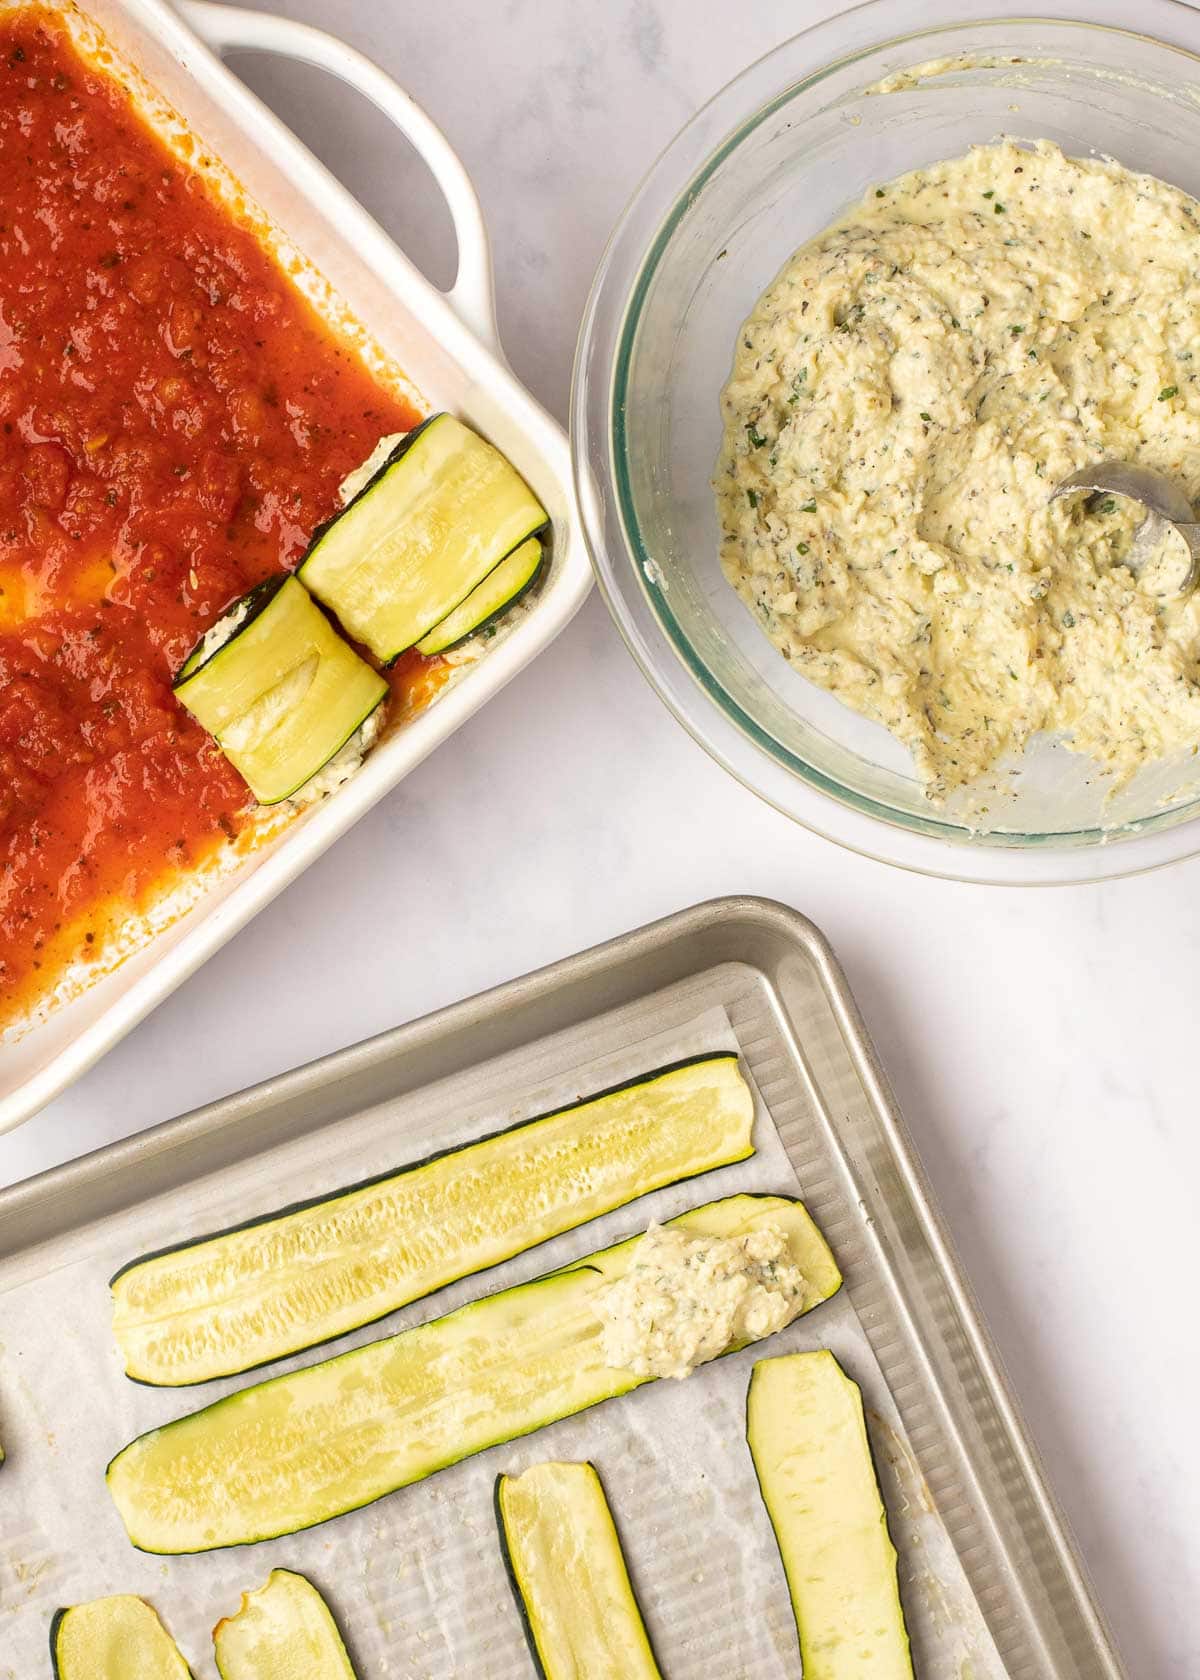 Place no more than 1 tablespoon of cheese filling on each zucchini slice, then roll. These will be placed in a pan coated with marinara sauce.